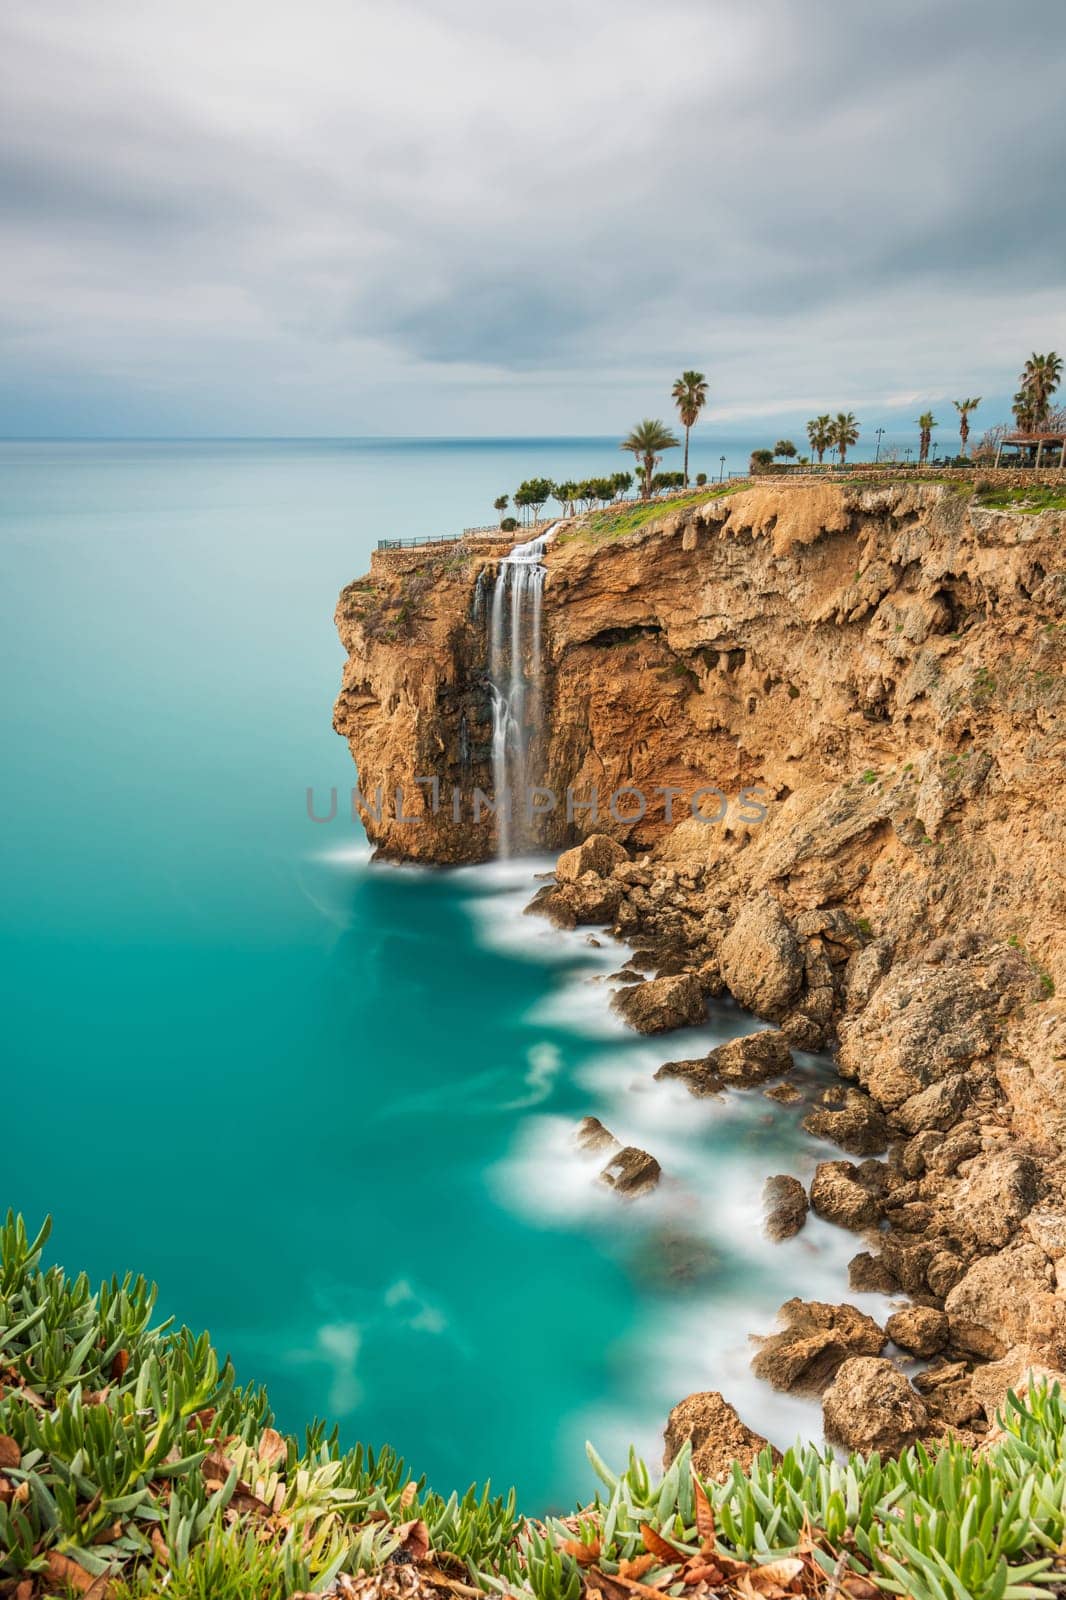 Long exposure image of the waterfall falling from the cliffs into the sea in Fener, Antalya